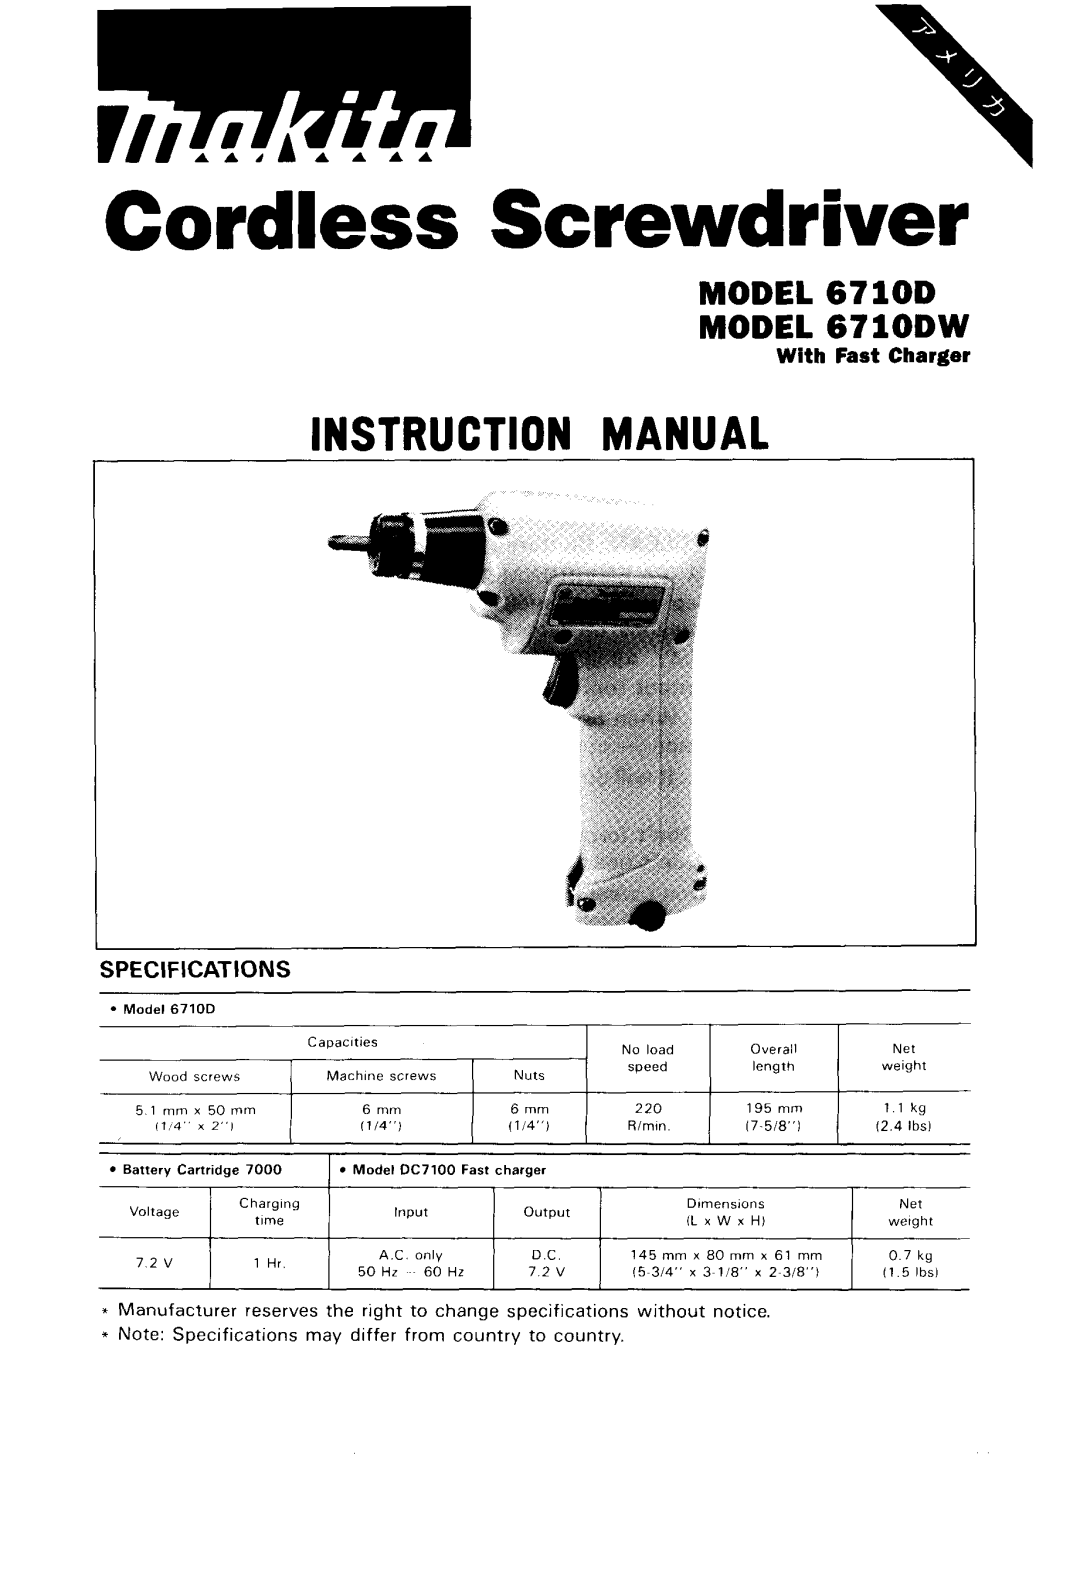 Makita 6710D instruction manual Specifications, With Fast Charger, Cordless Screwdriver, Instruction Manual, 6 mm, lhsl 